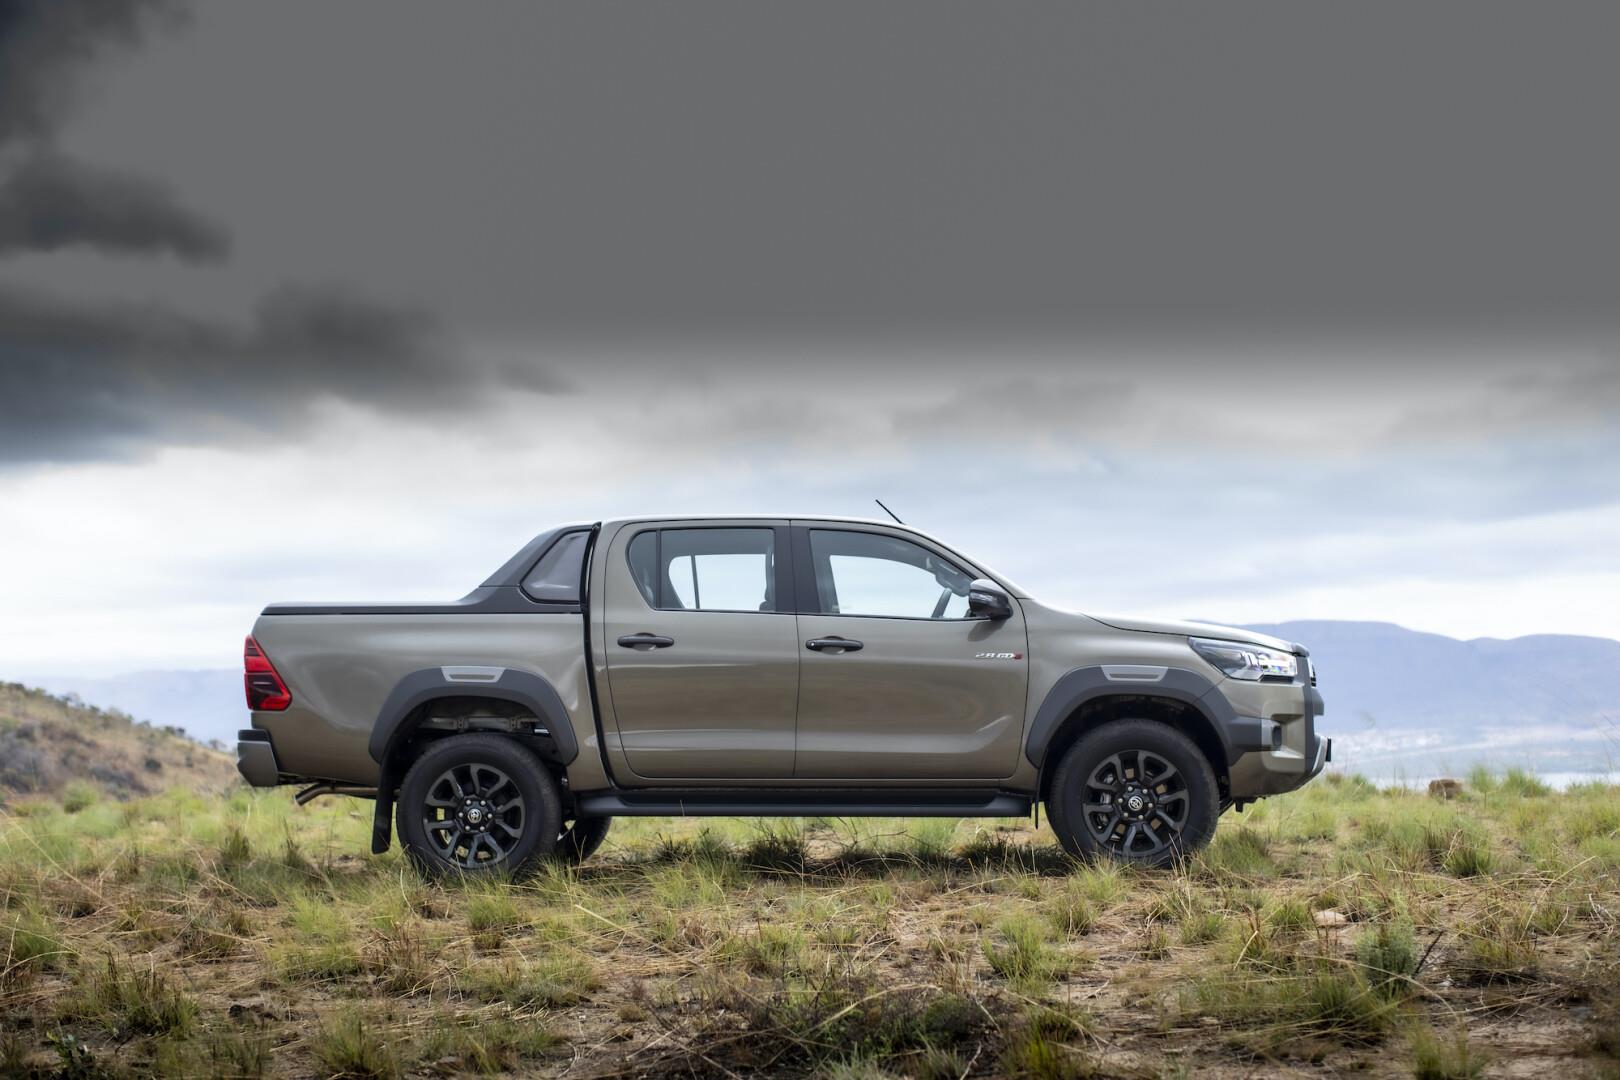 Eight Generations in, the Toyota Hilux is Redefining Tough